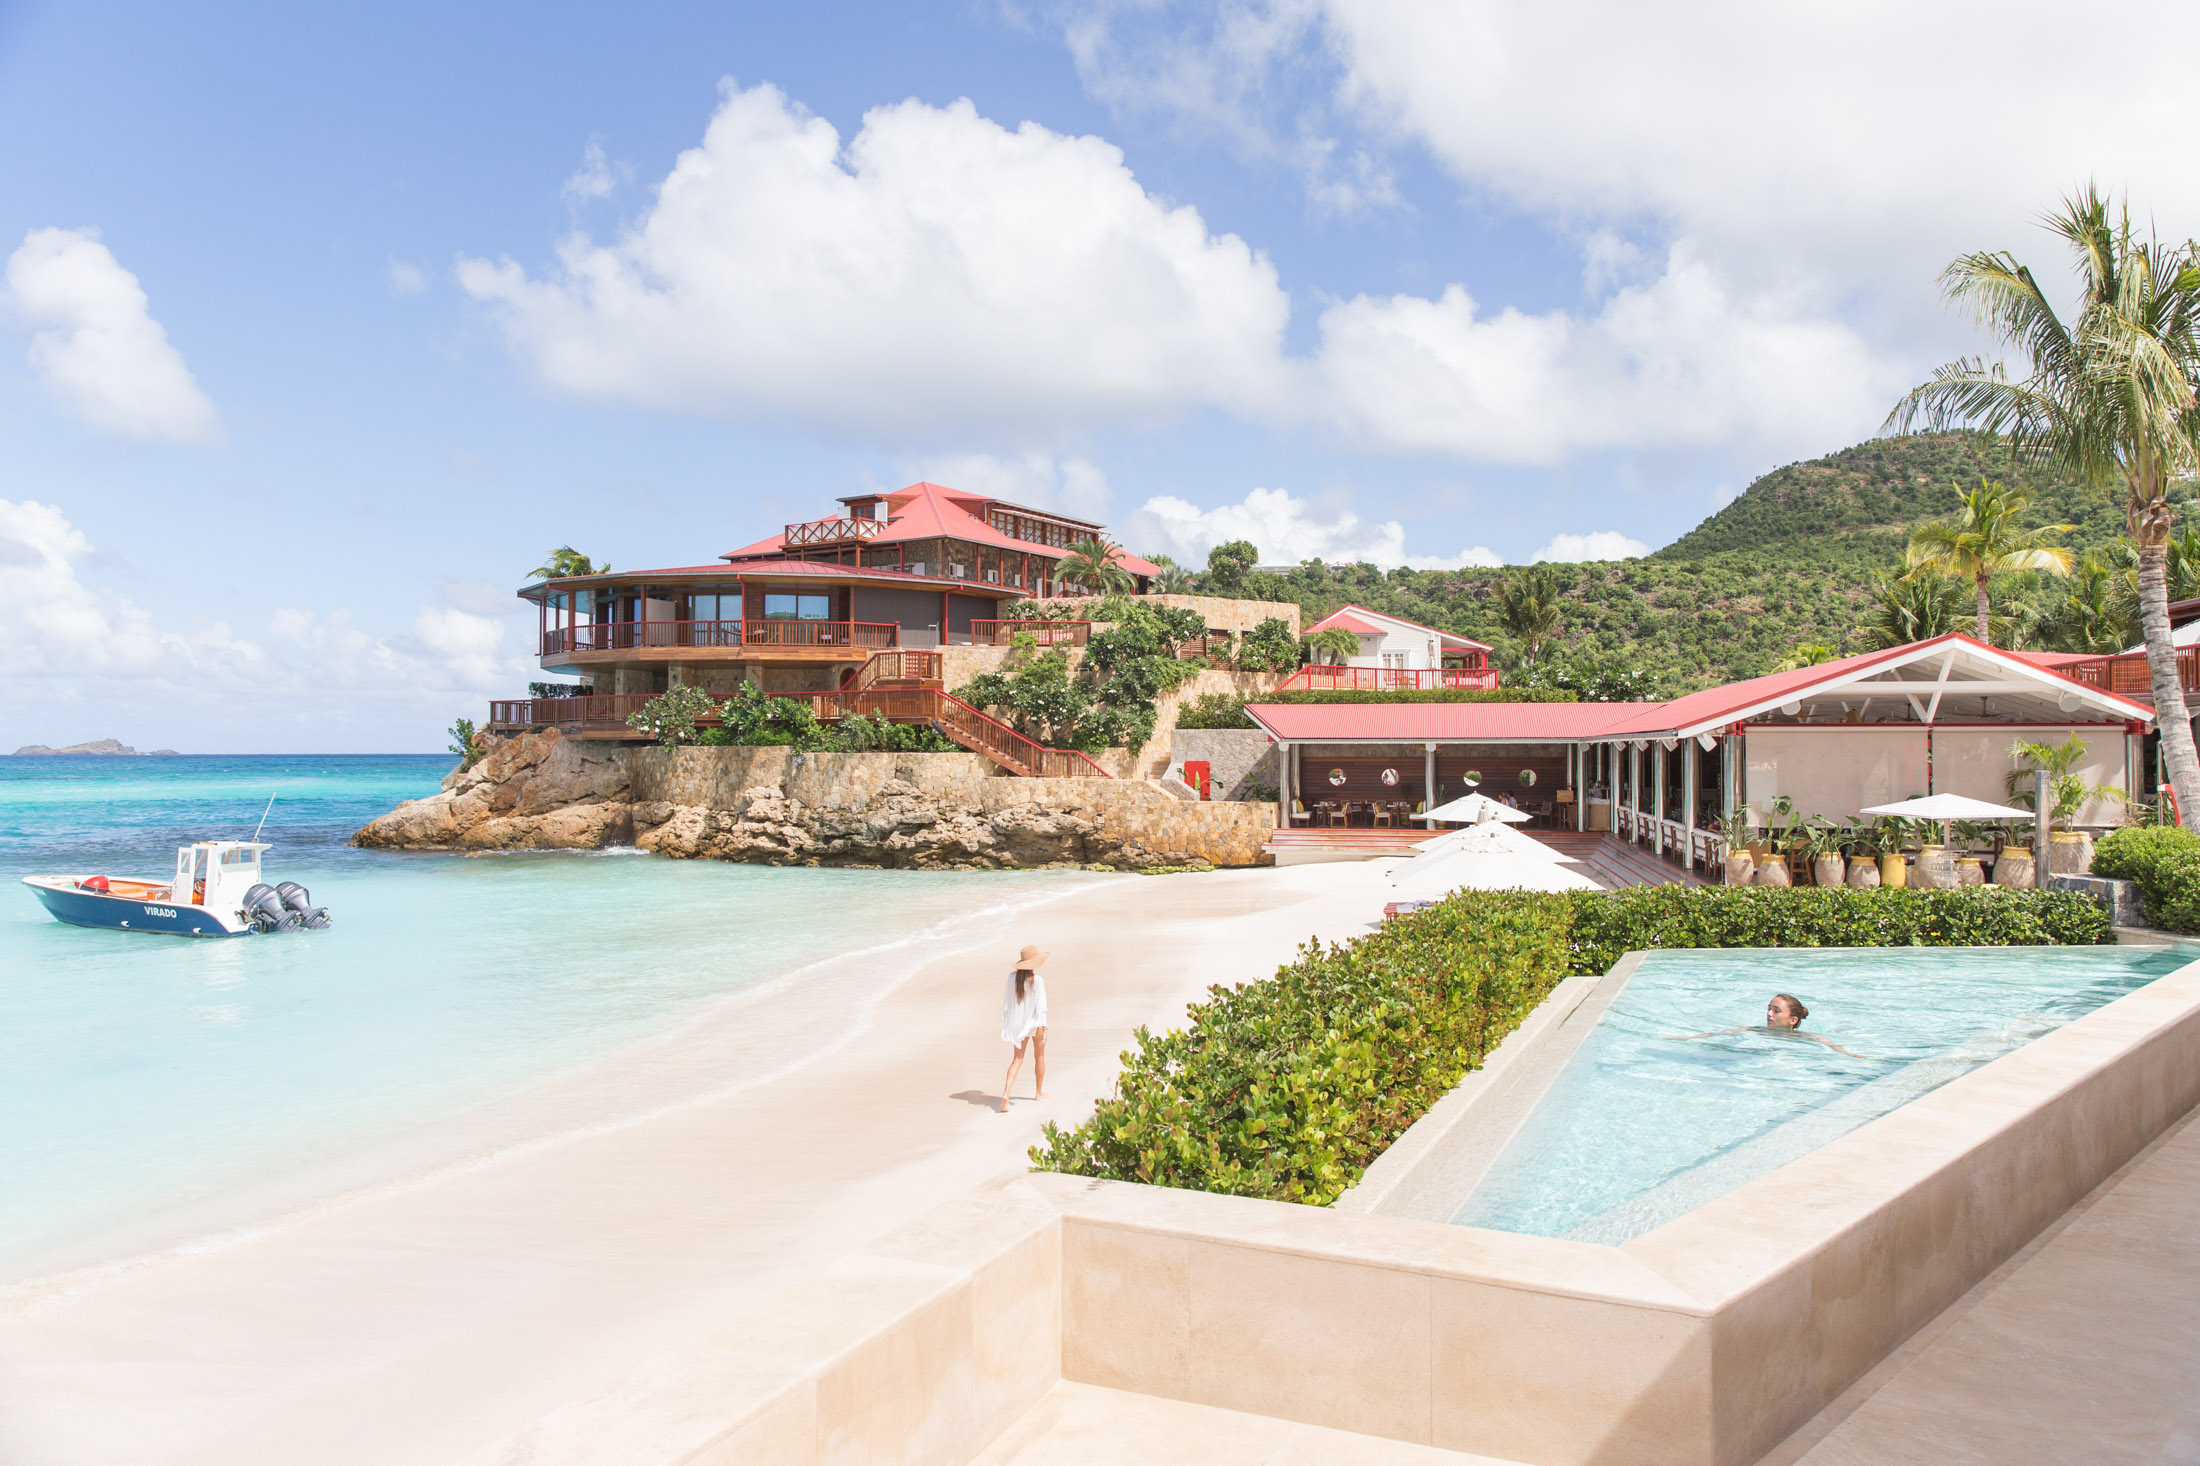 Things to do in St Barths during Easter